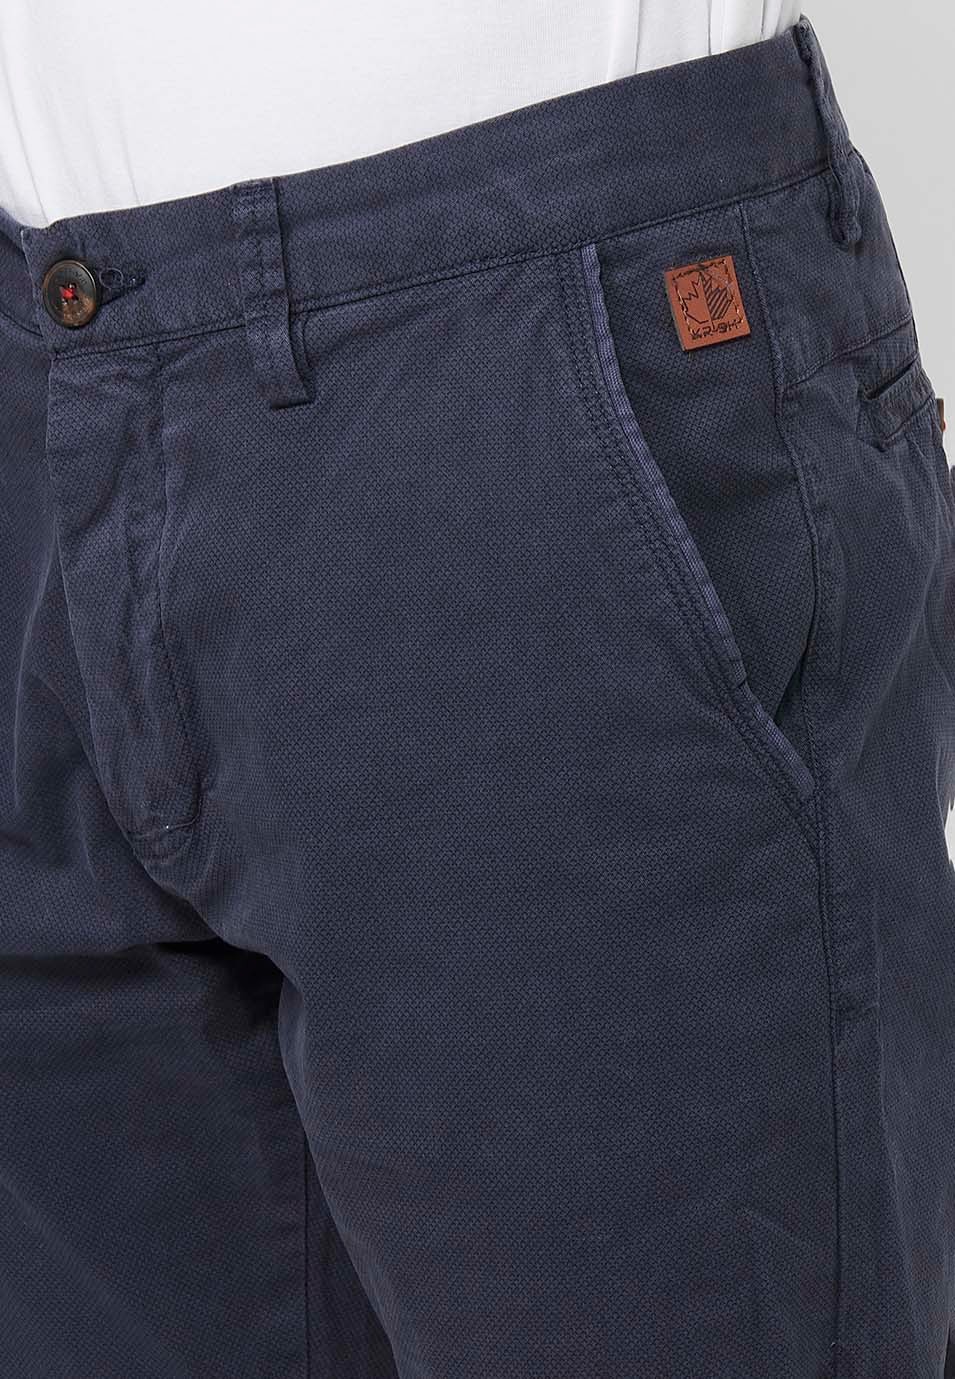 Bermuda Chino shorts with turn-up finish with front zipper and button closure with four pockets in Navy Color for Men 7